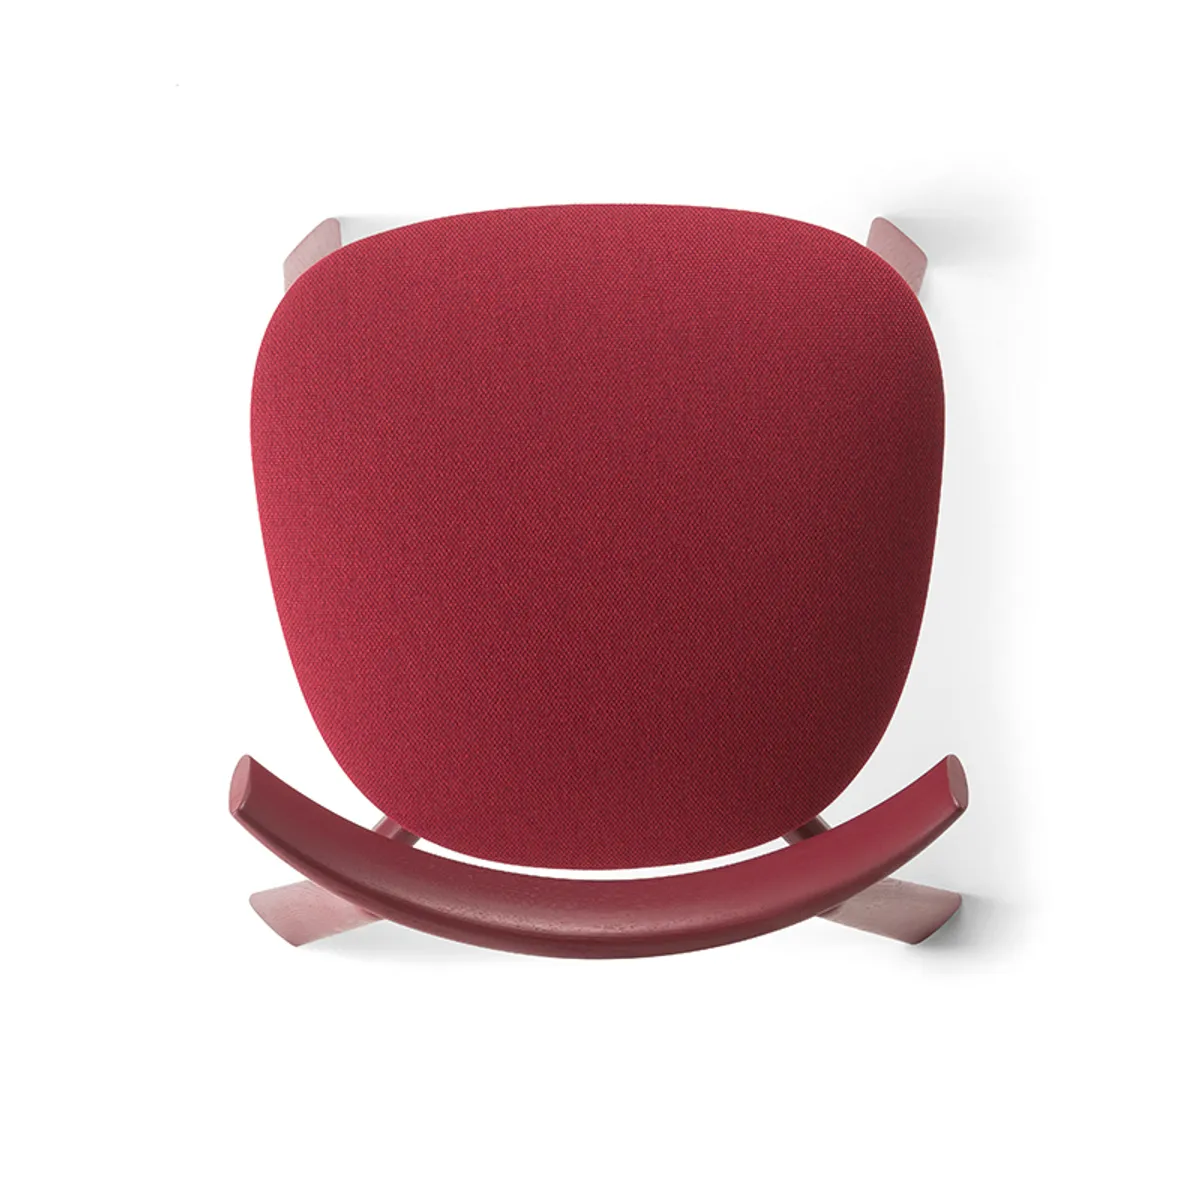 Remo Soft Chair Red 001